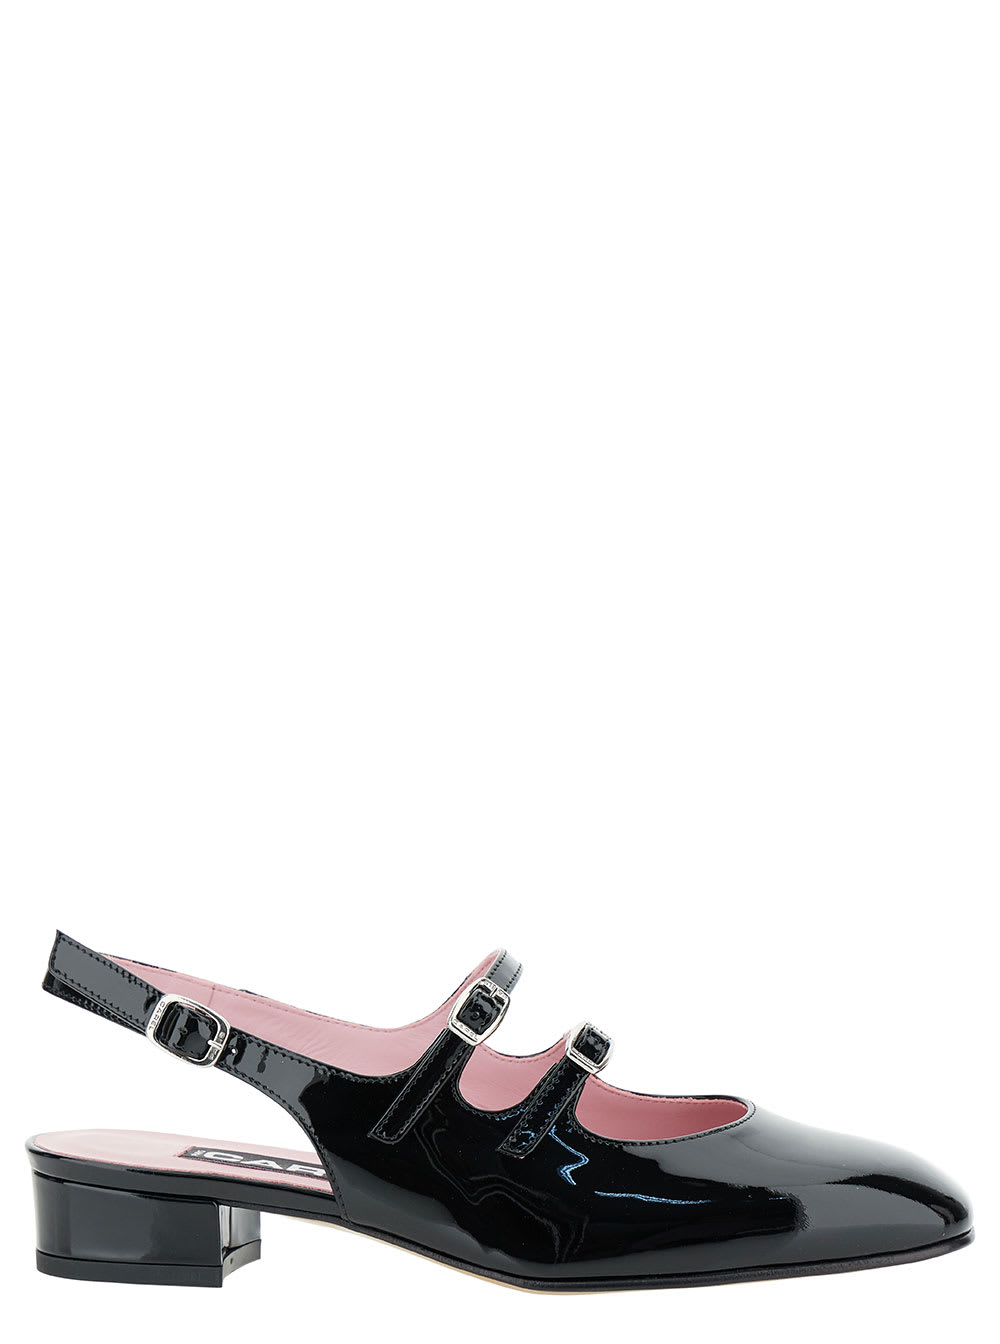 Black Slingback Mary Janes With Block Heel In Patent Leather Woman